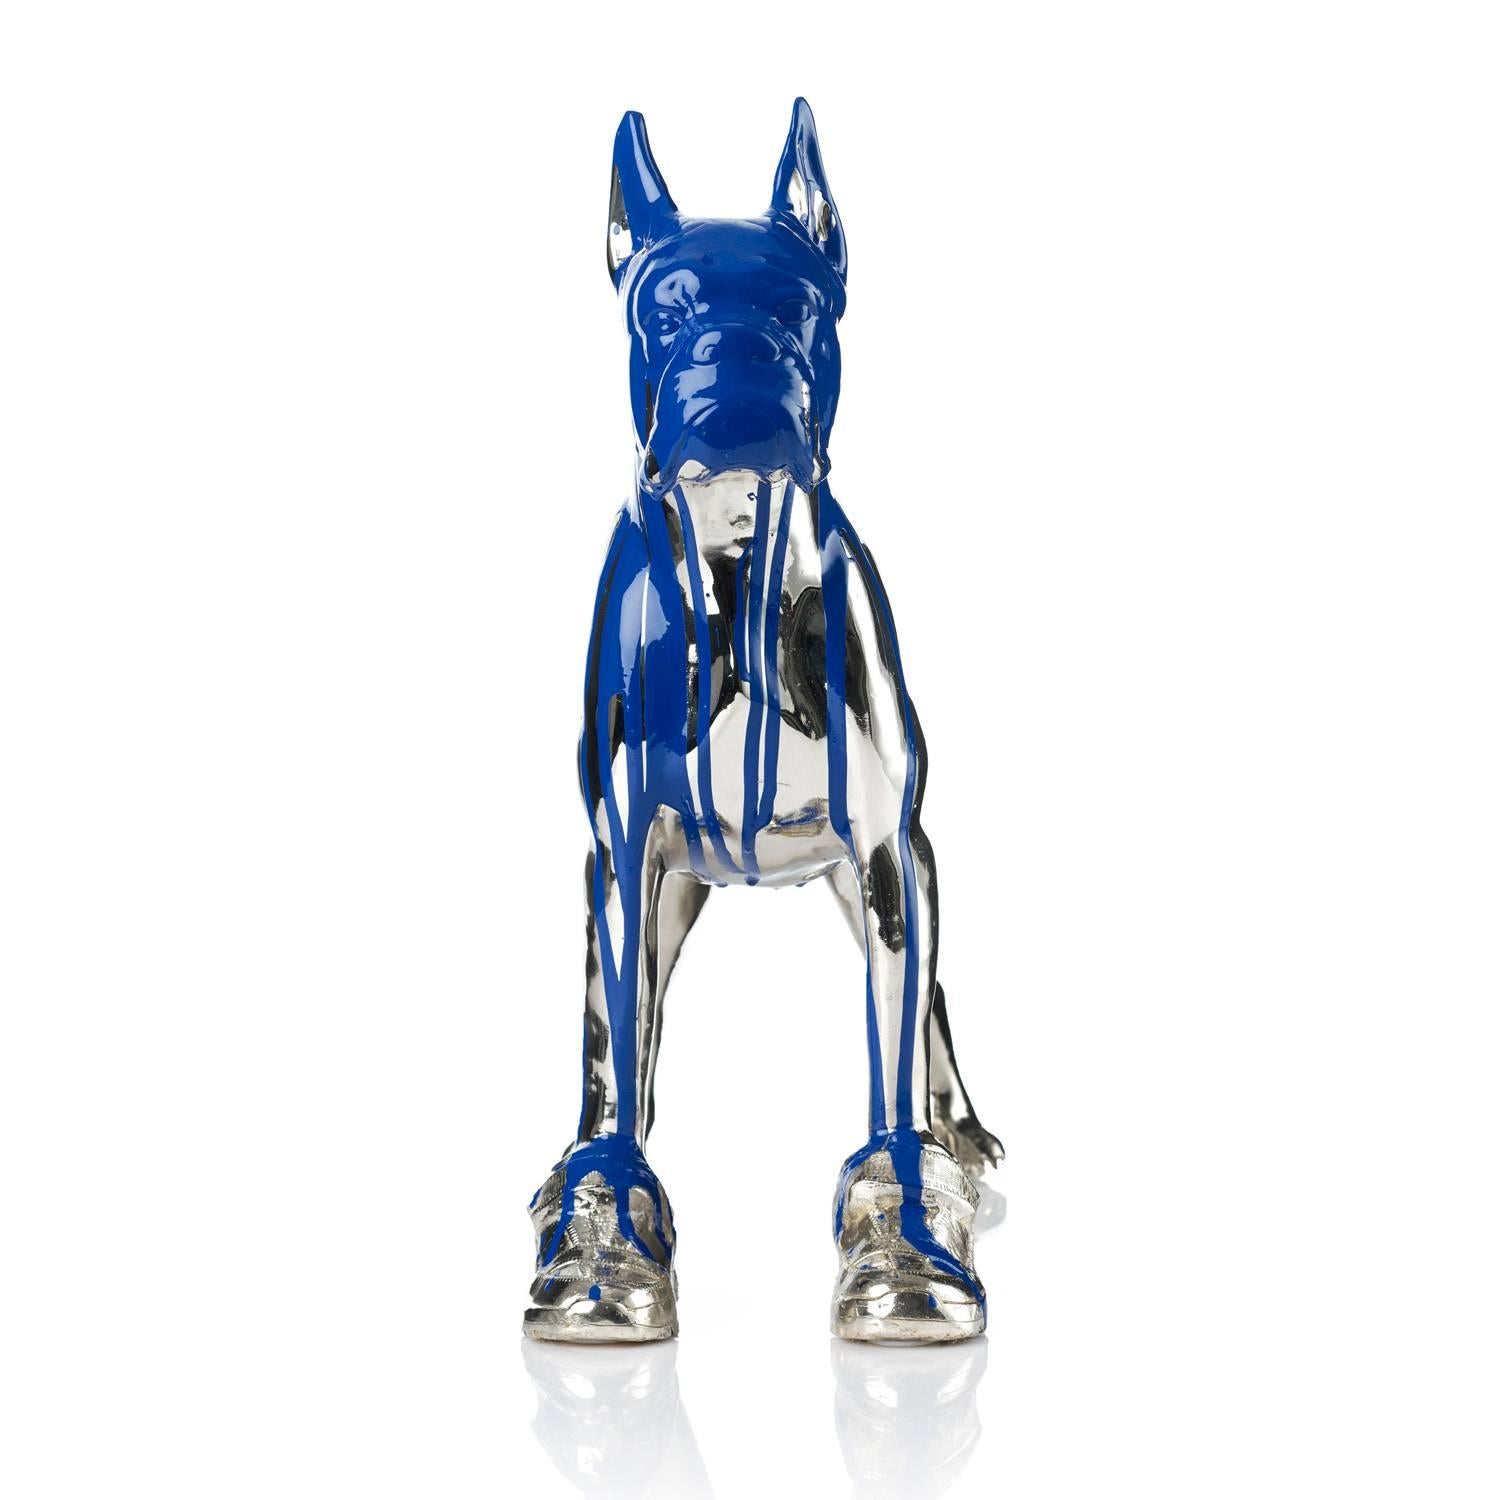 Cloned Bulldog with pet bottle - Sculpture by William Sweetlove